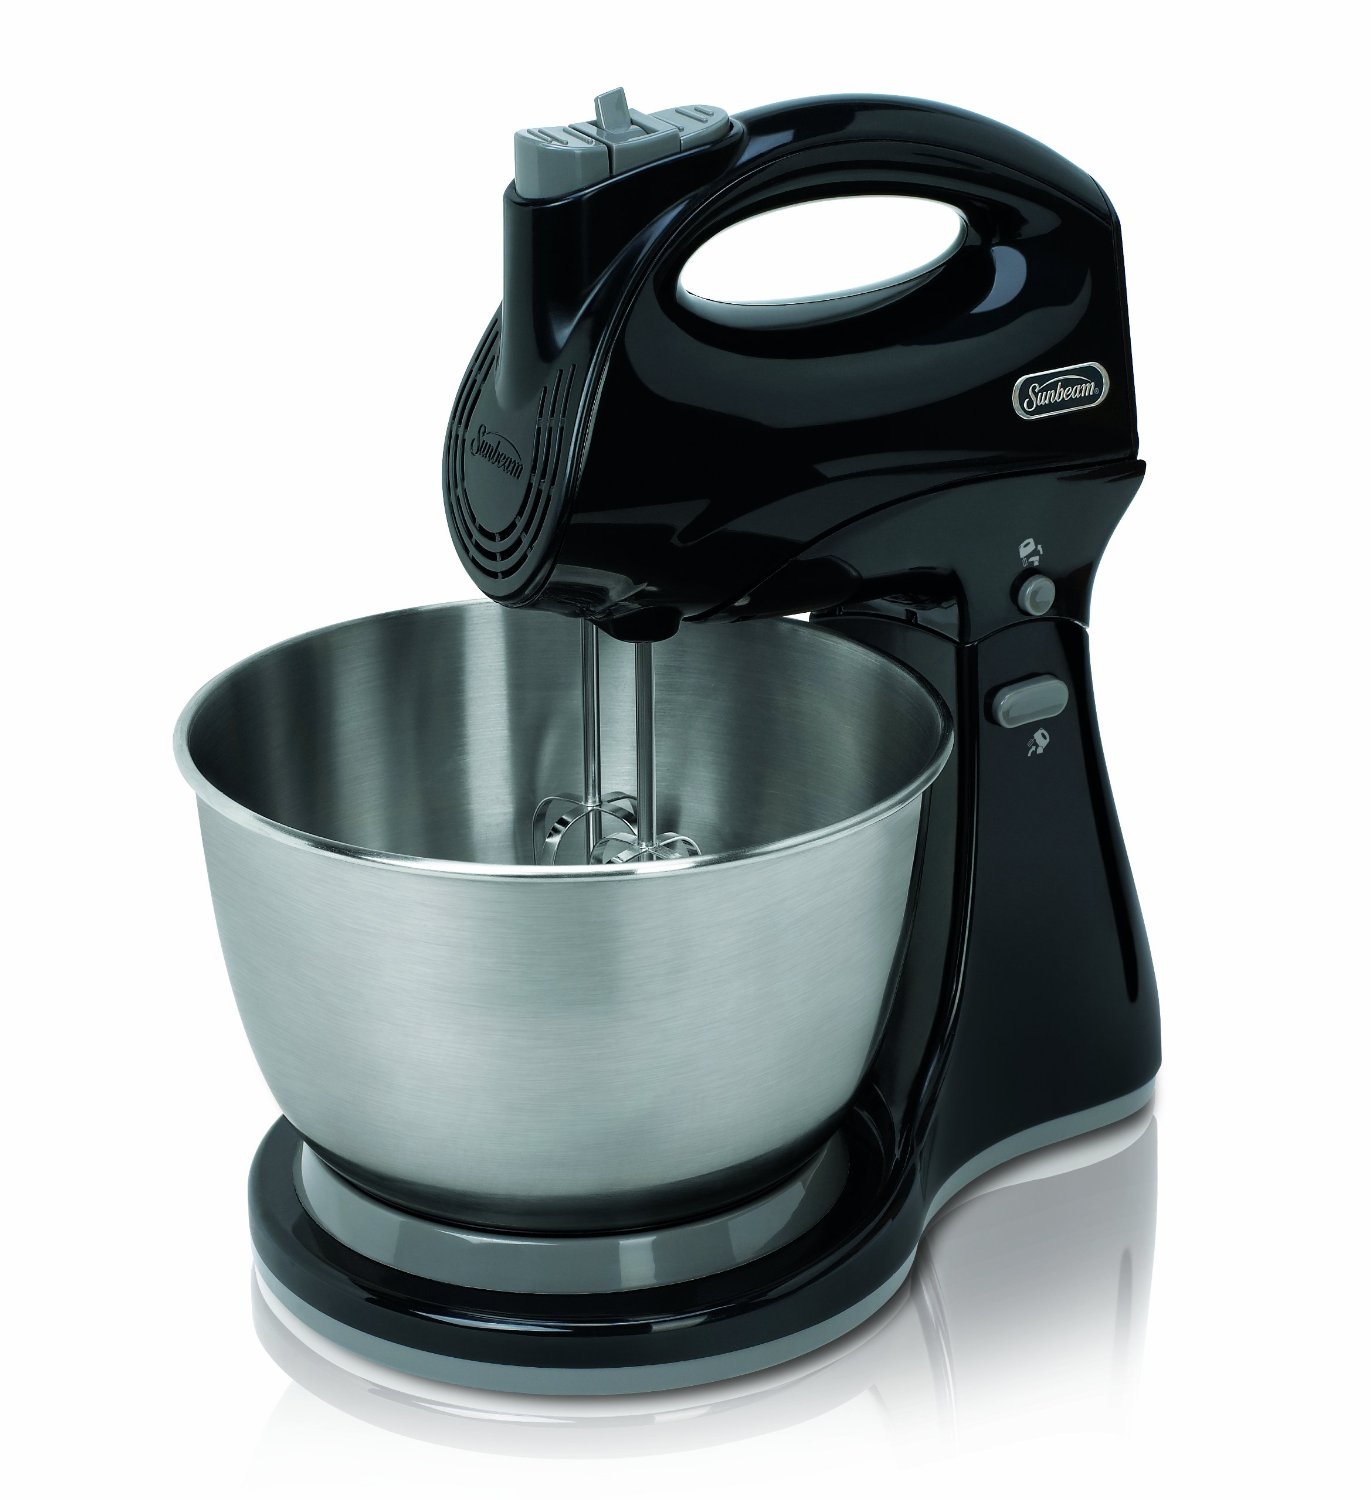 40% off Sunbeam Hand & Stand All-in-One Mixer at Target (Today Only)